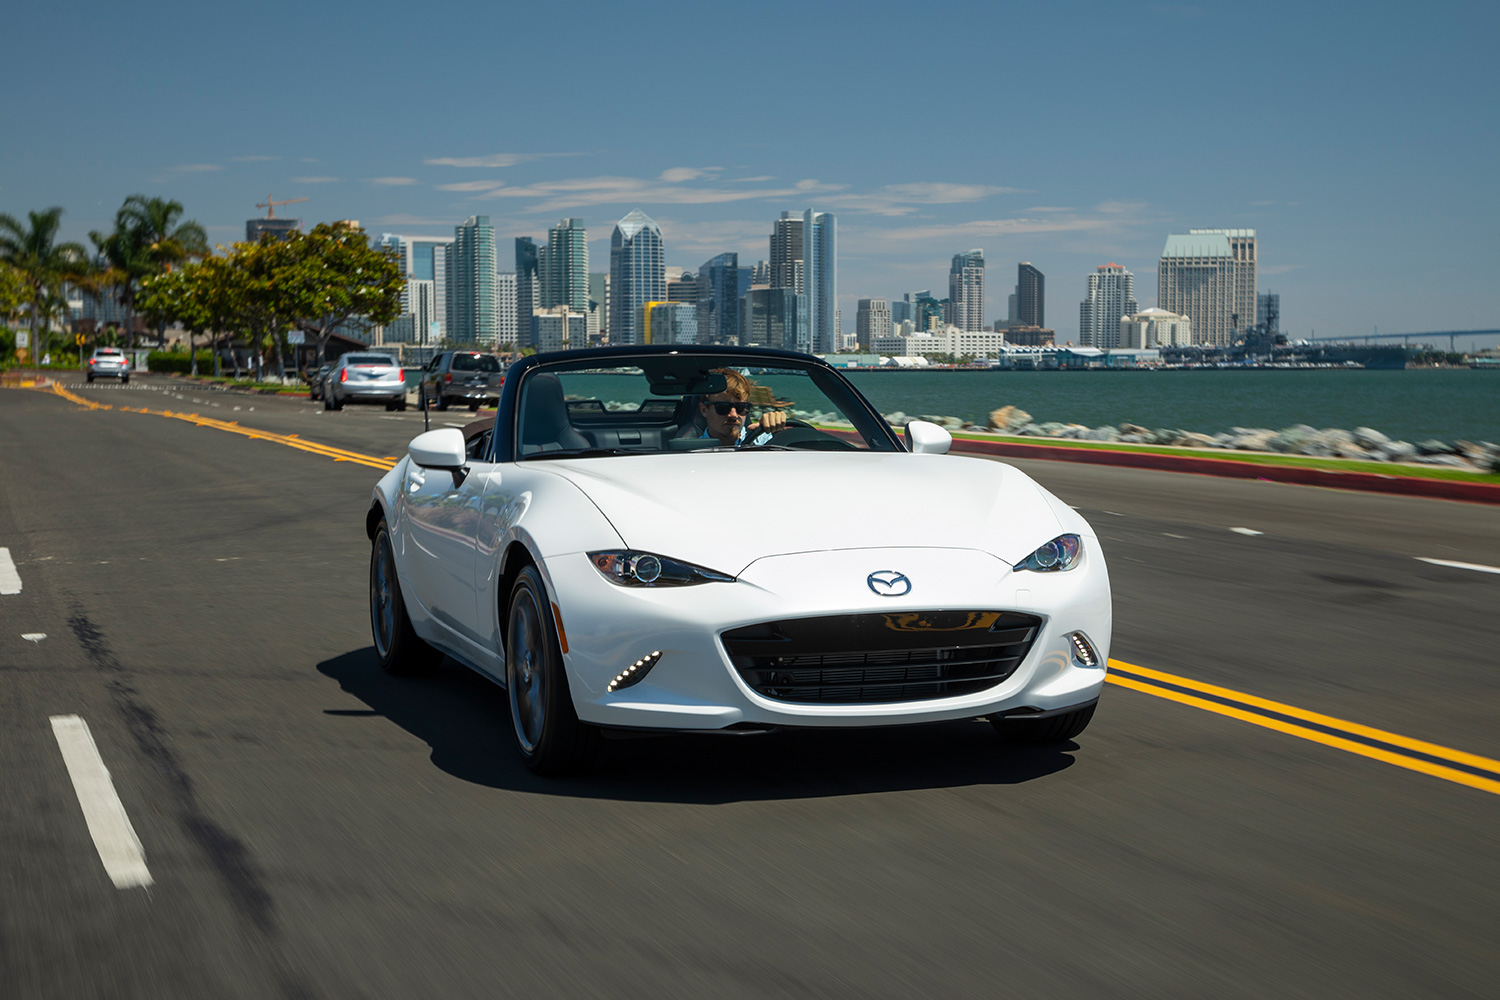 Mazda MX-5 Miata, our pick for the best affordable sports car